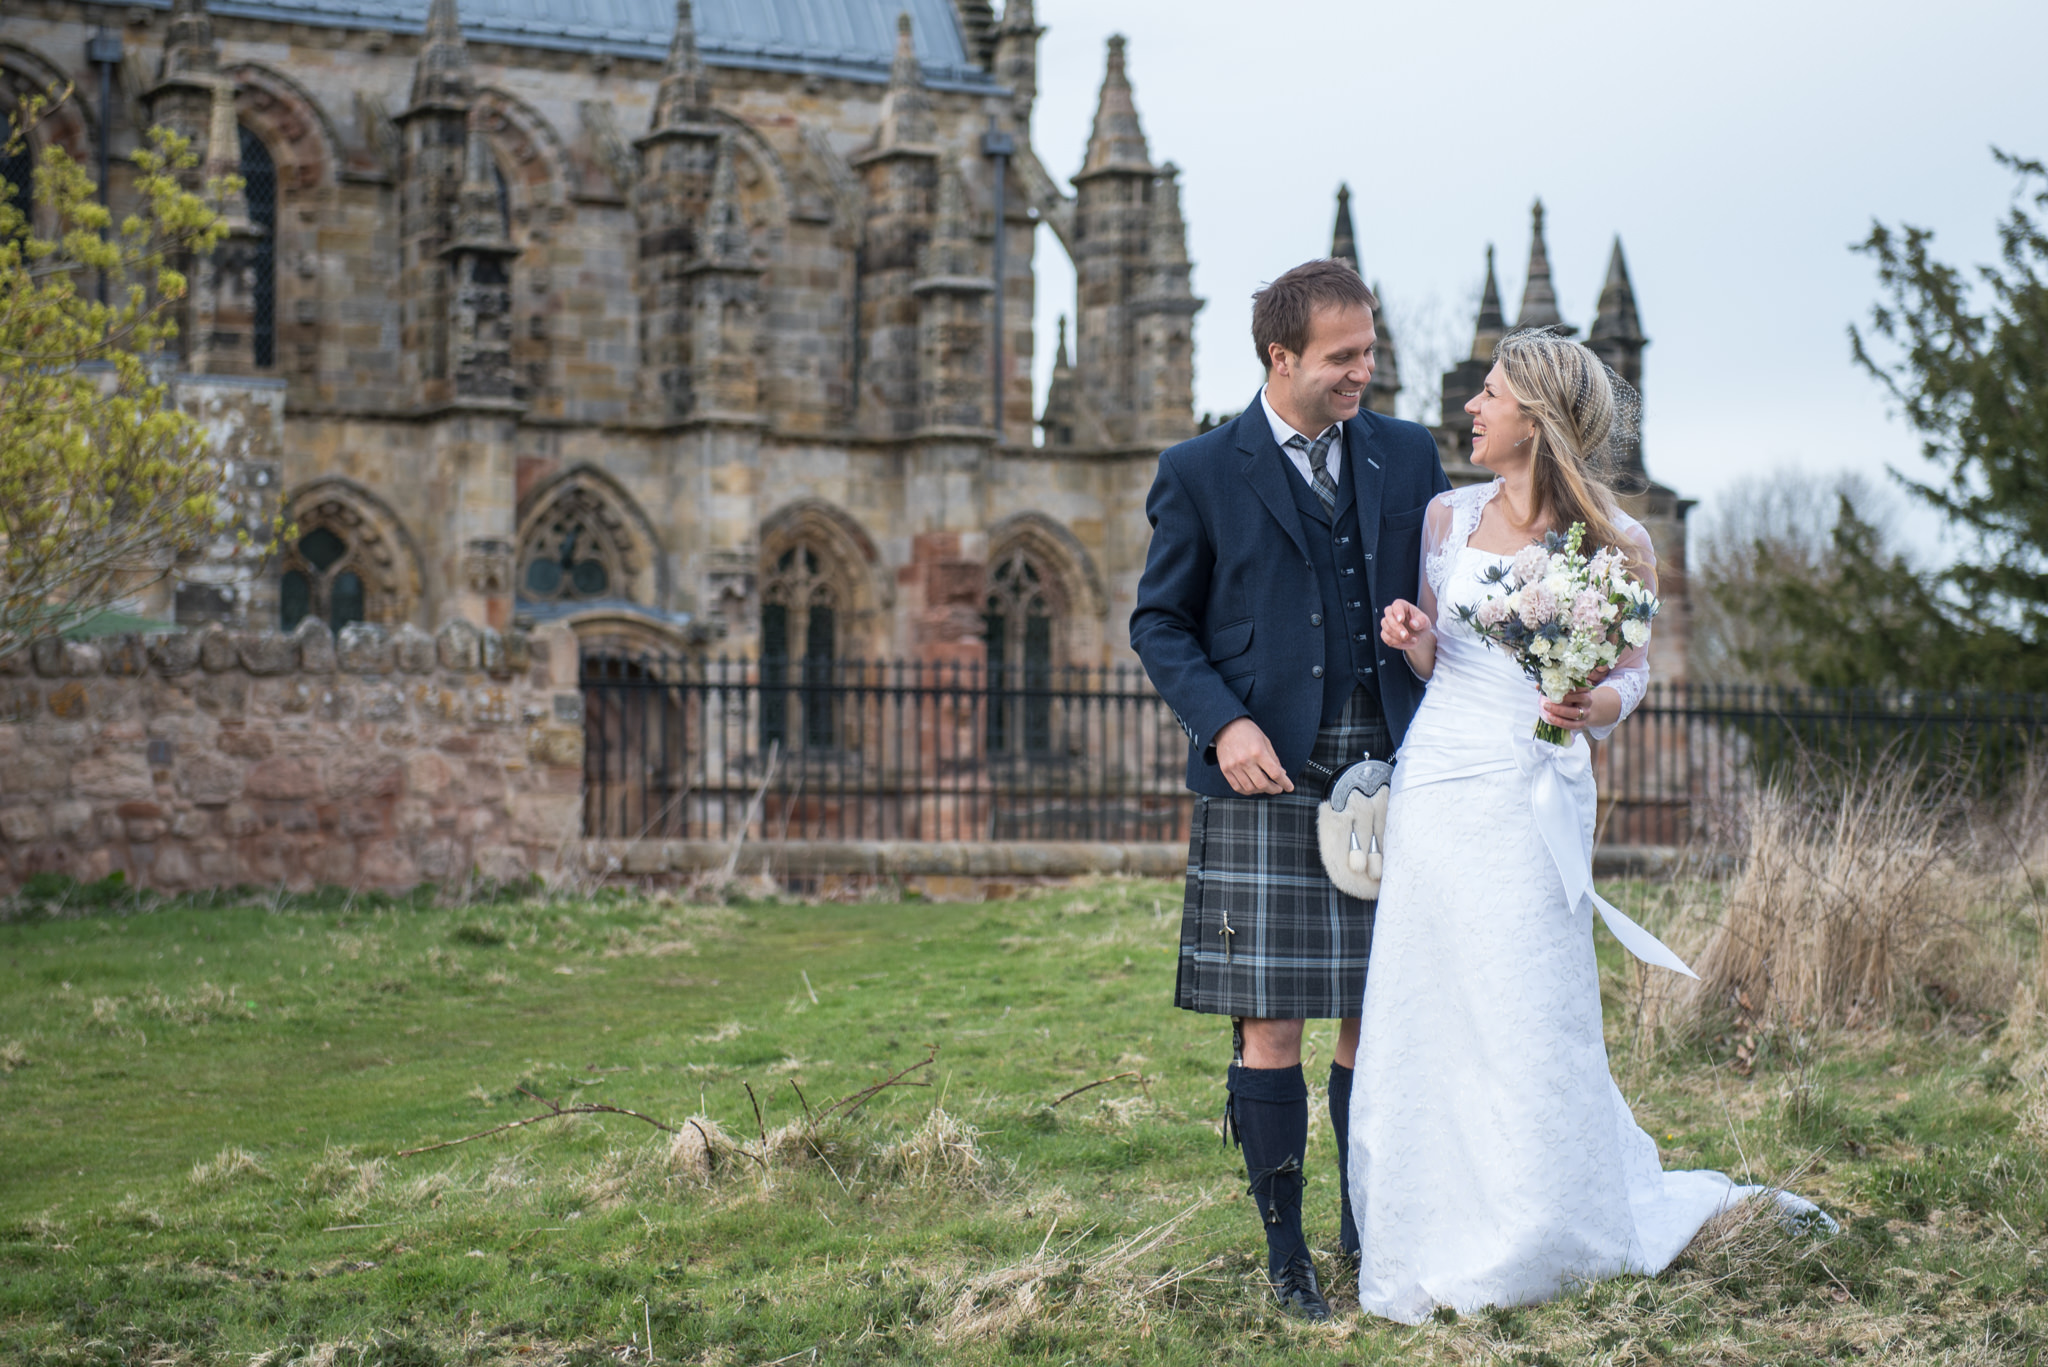  Douglas and Daria's wedding at Rosslyn Chapel - 24 April 2016 - © Photography by Juliebee 